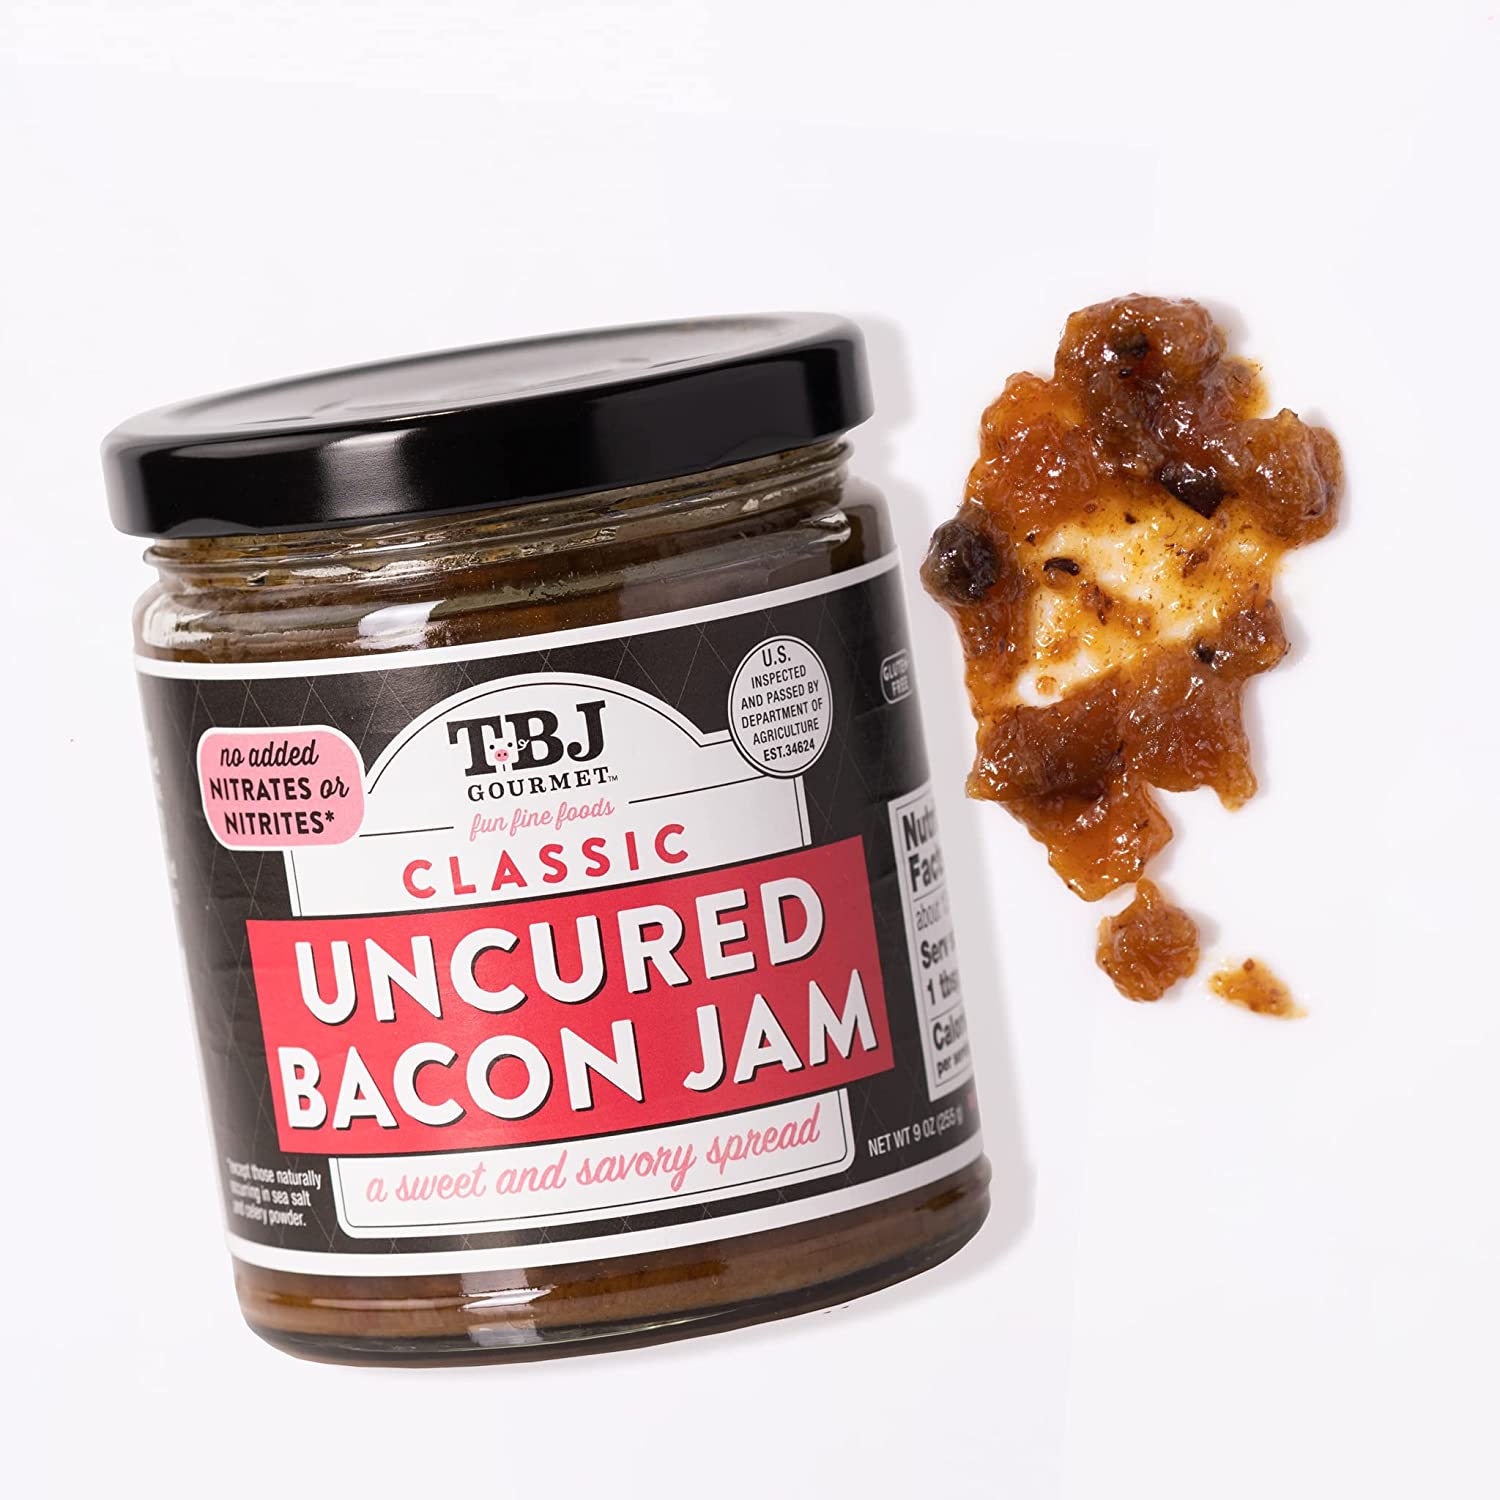 A glass jar of bacon jam with a small amount of bacon jam smeared next to the jar.